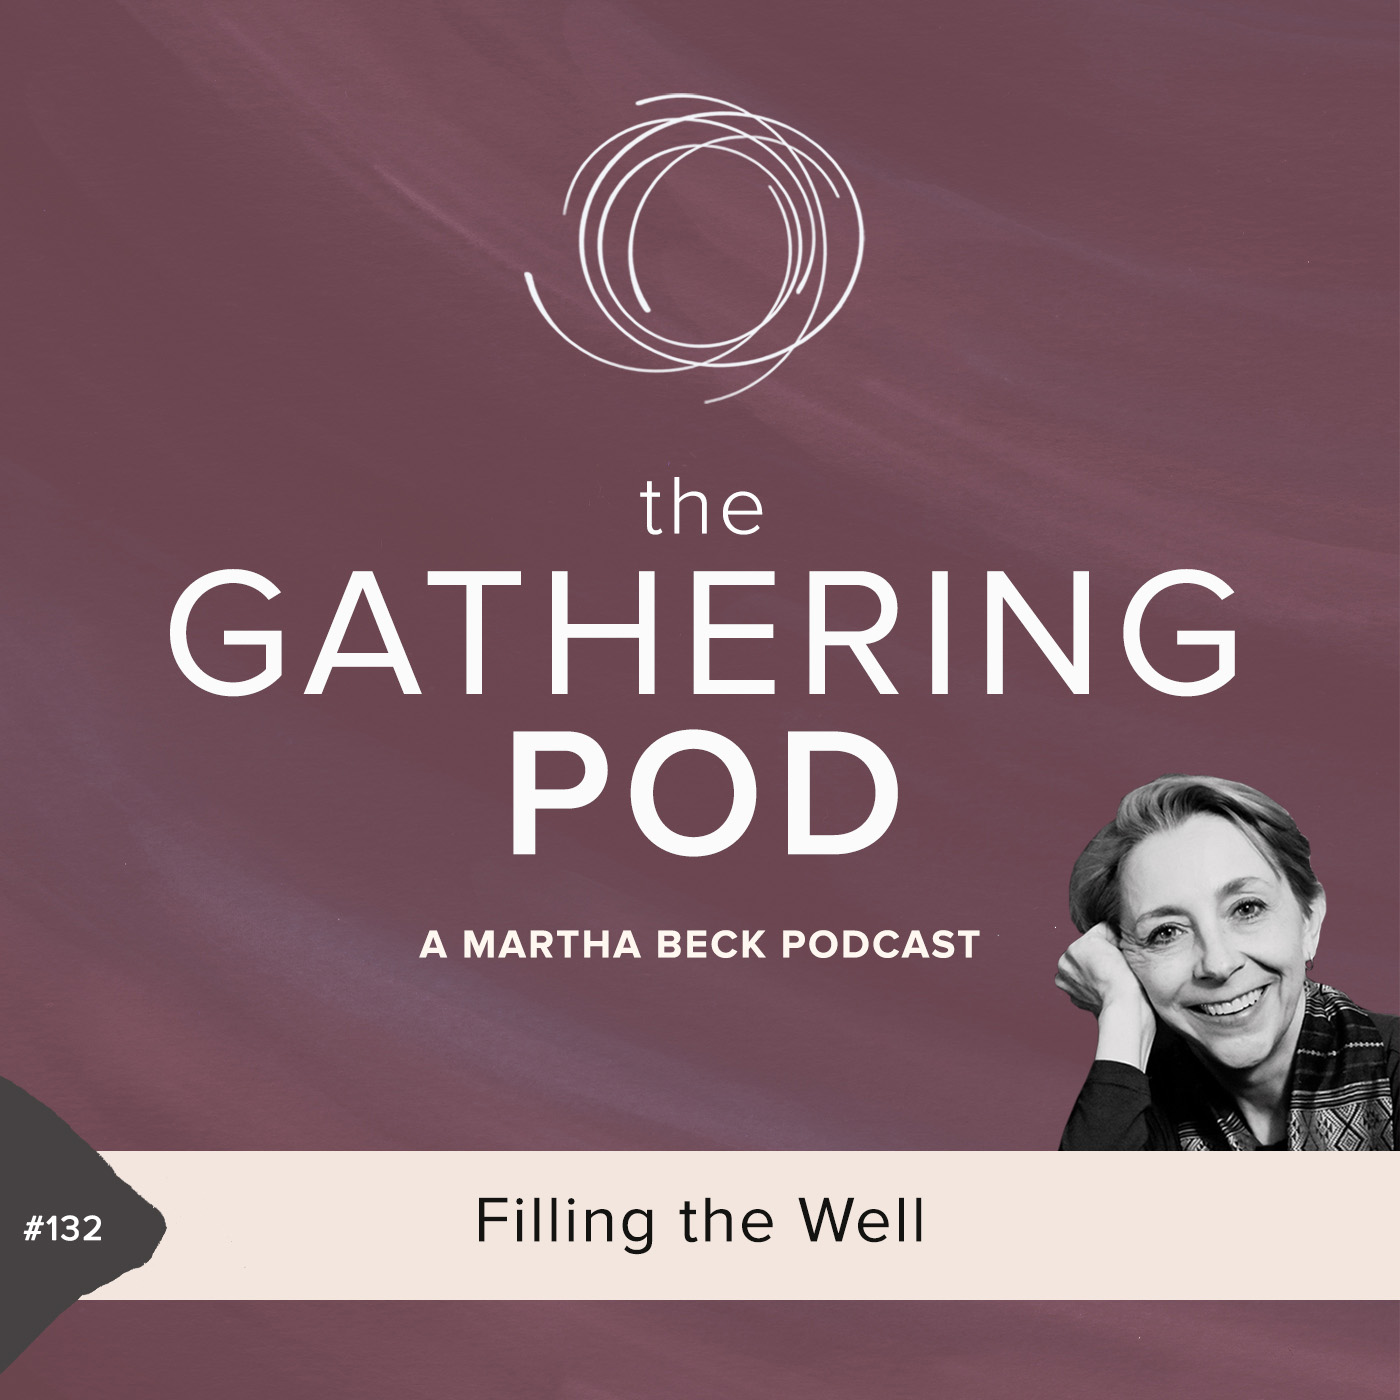 Image for The Gathering Pod A Martha Beck Podcast Episode #132 Filling the Well